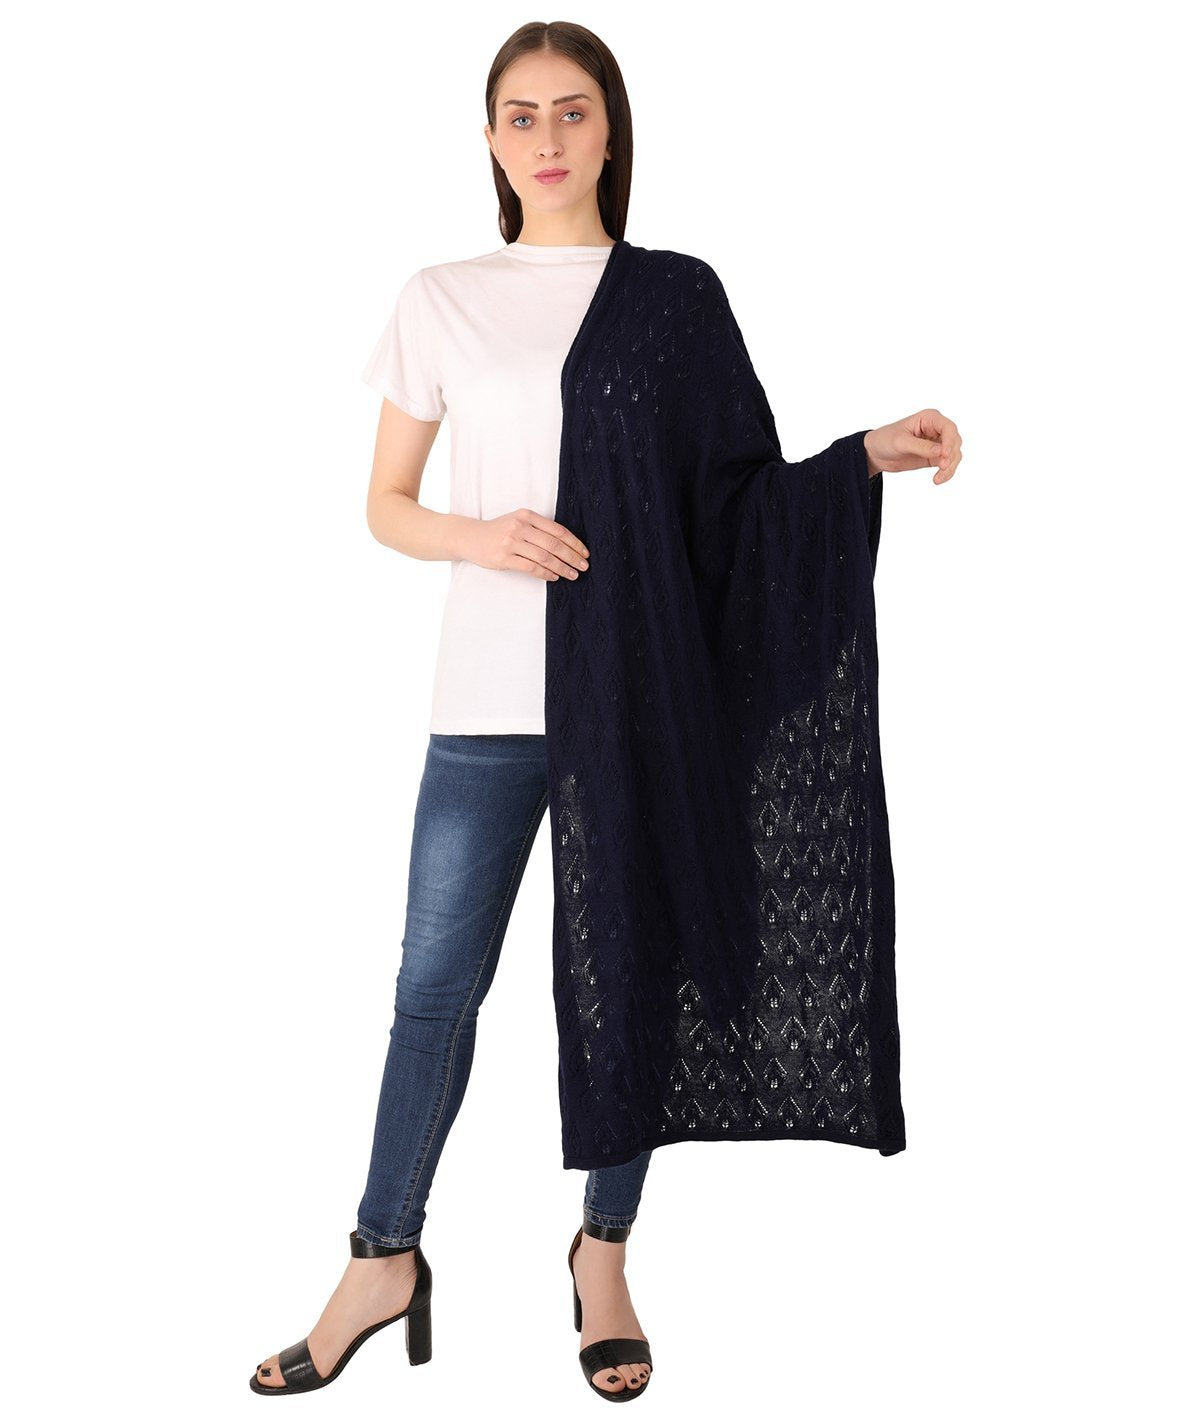 Avery - Navy Color Lambswool & Nylon Knitted Shawl Wrap